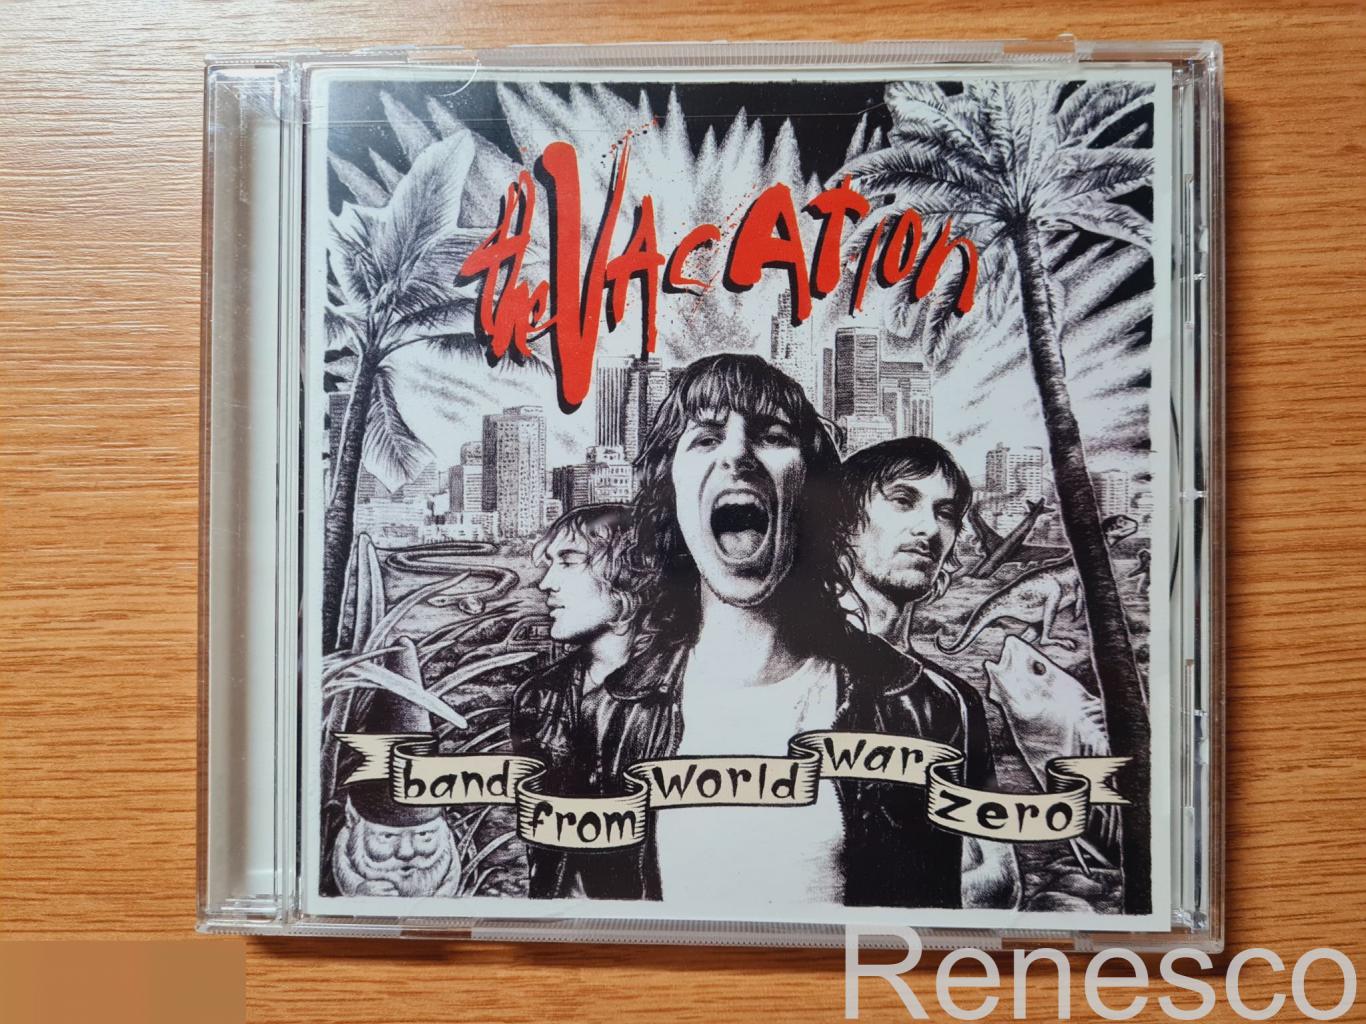 The Vacation ?– Band From World War Zero (USA) (2004)